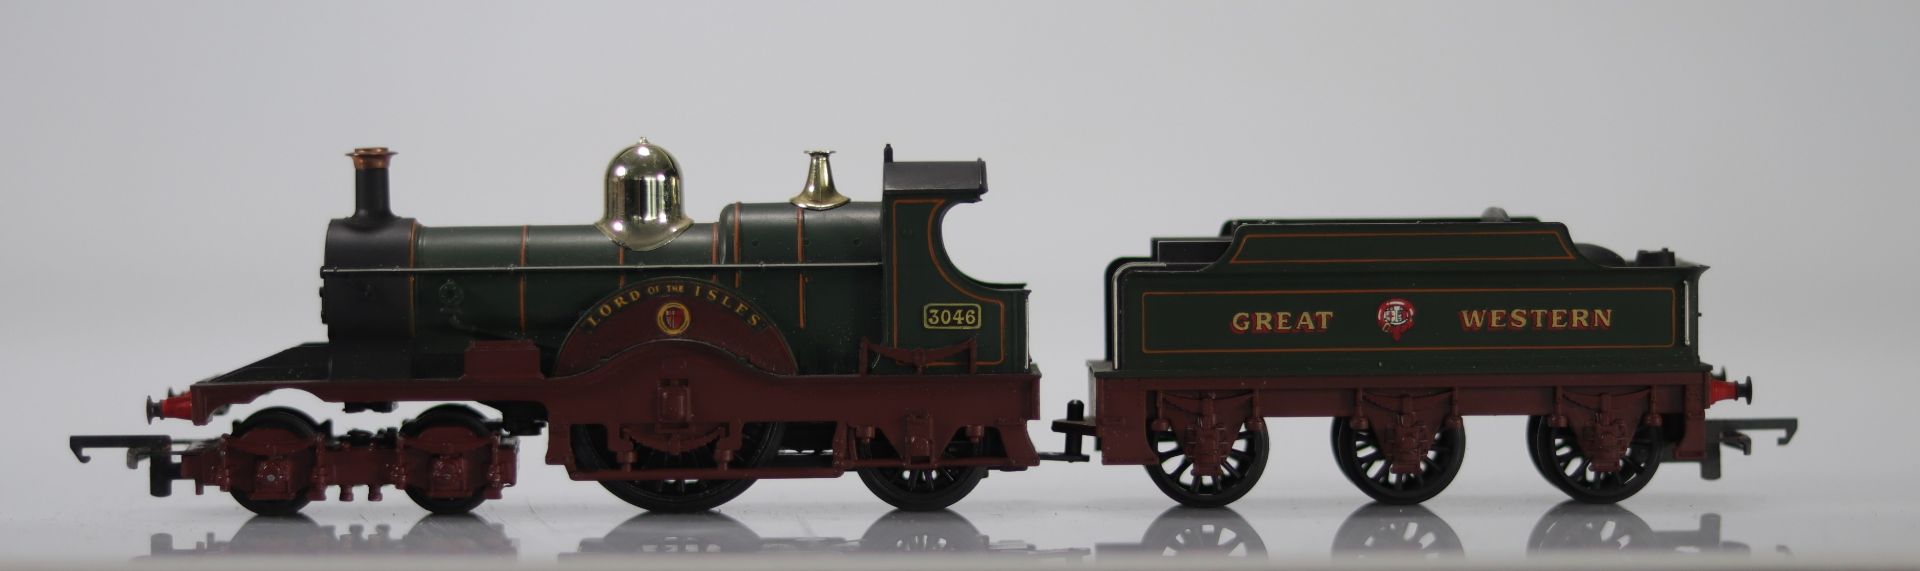 Hornby locomotive / Reference: R354 / Type: 4.2.2. Lord of the Isles 3046